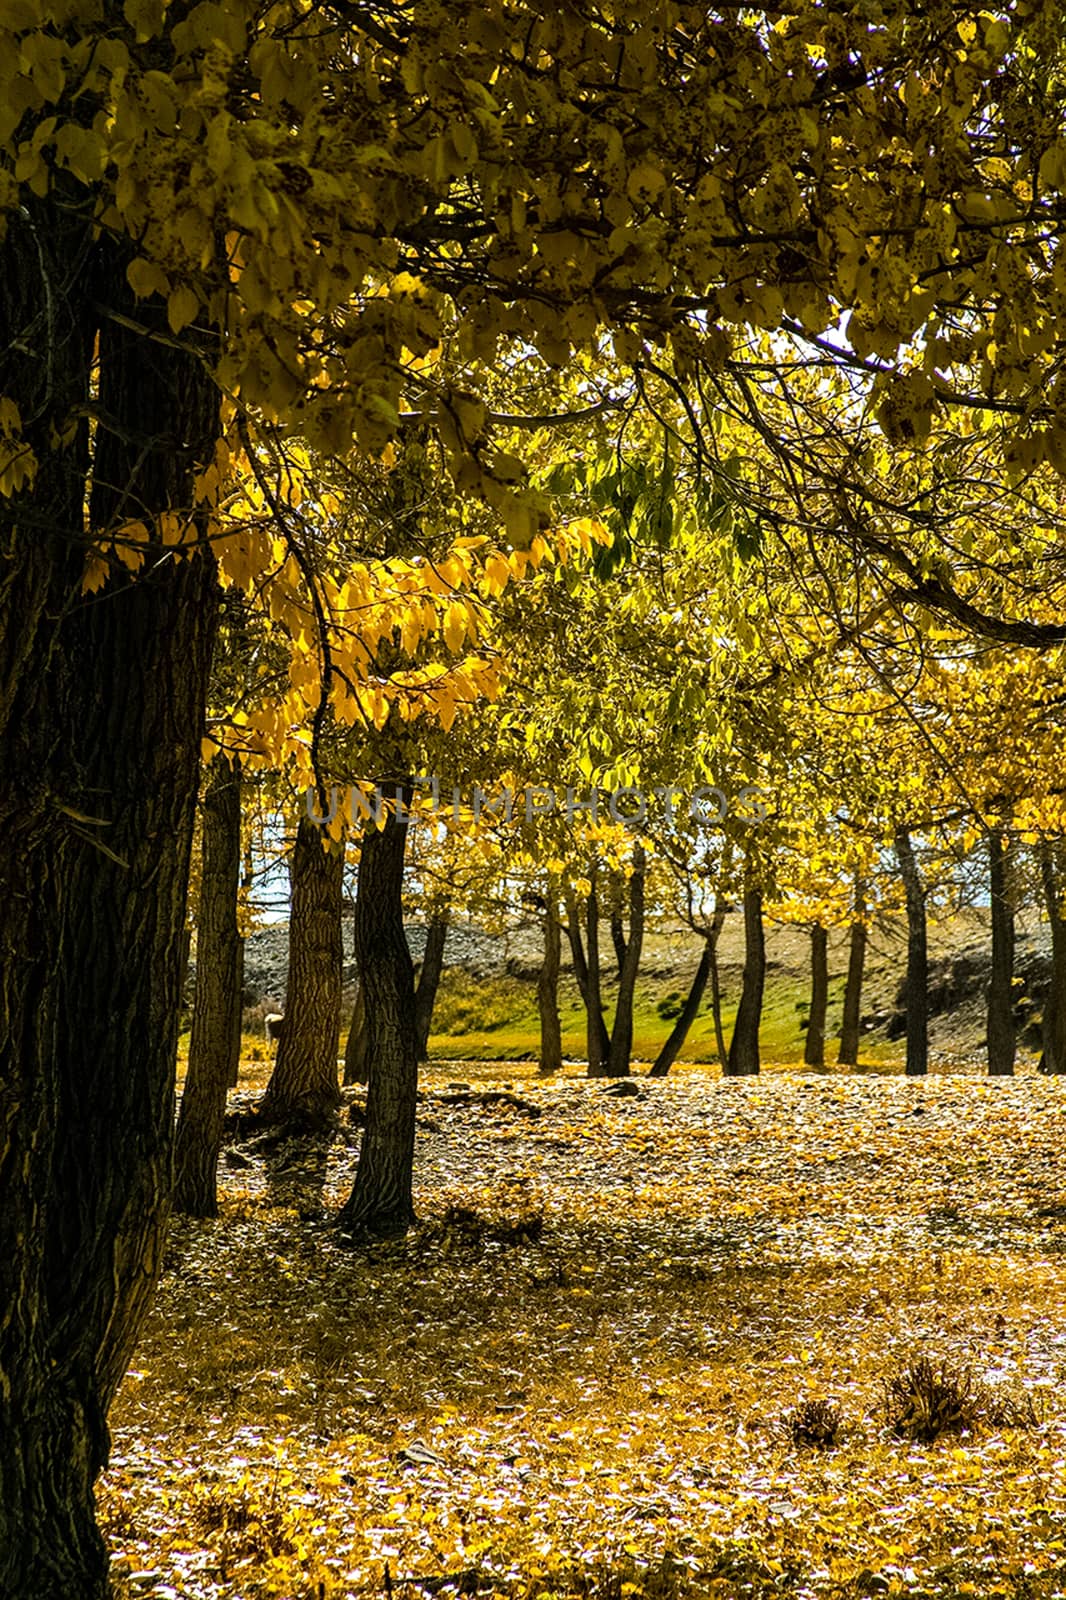 Autumn in leafy forest. Dry grass and yellow tree leaves. by DePo